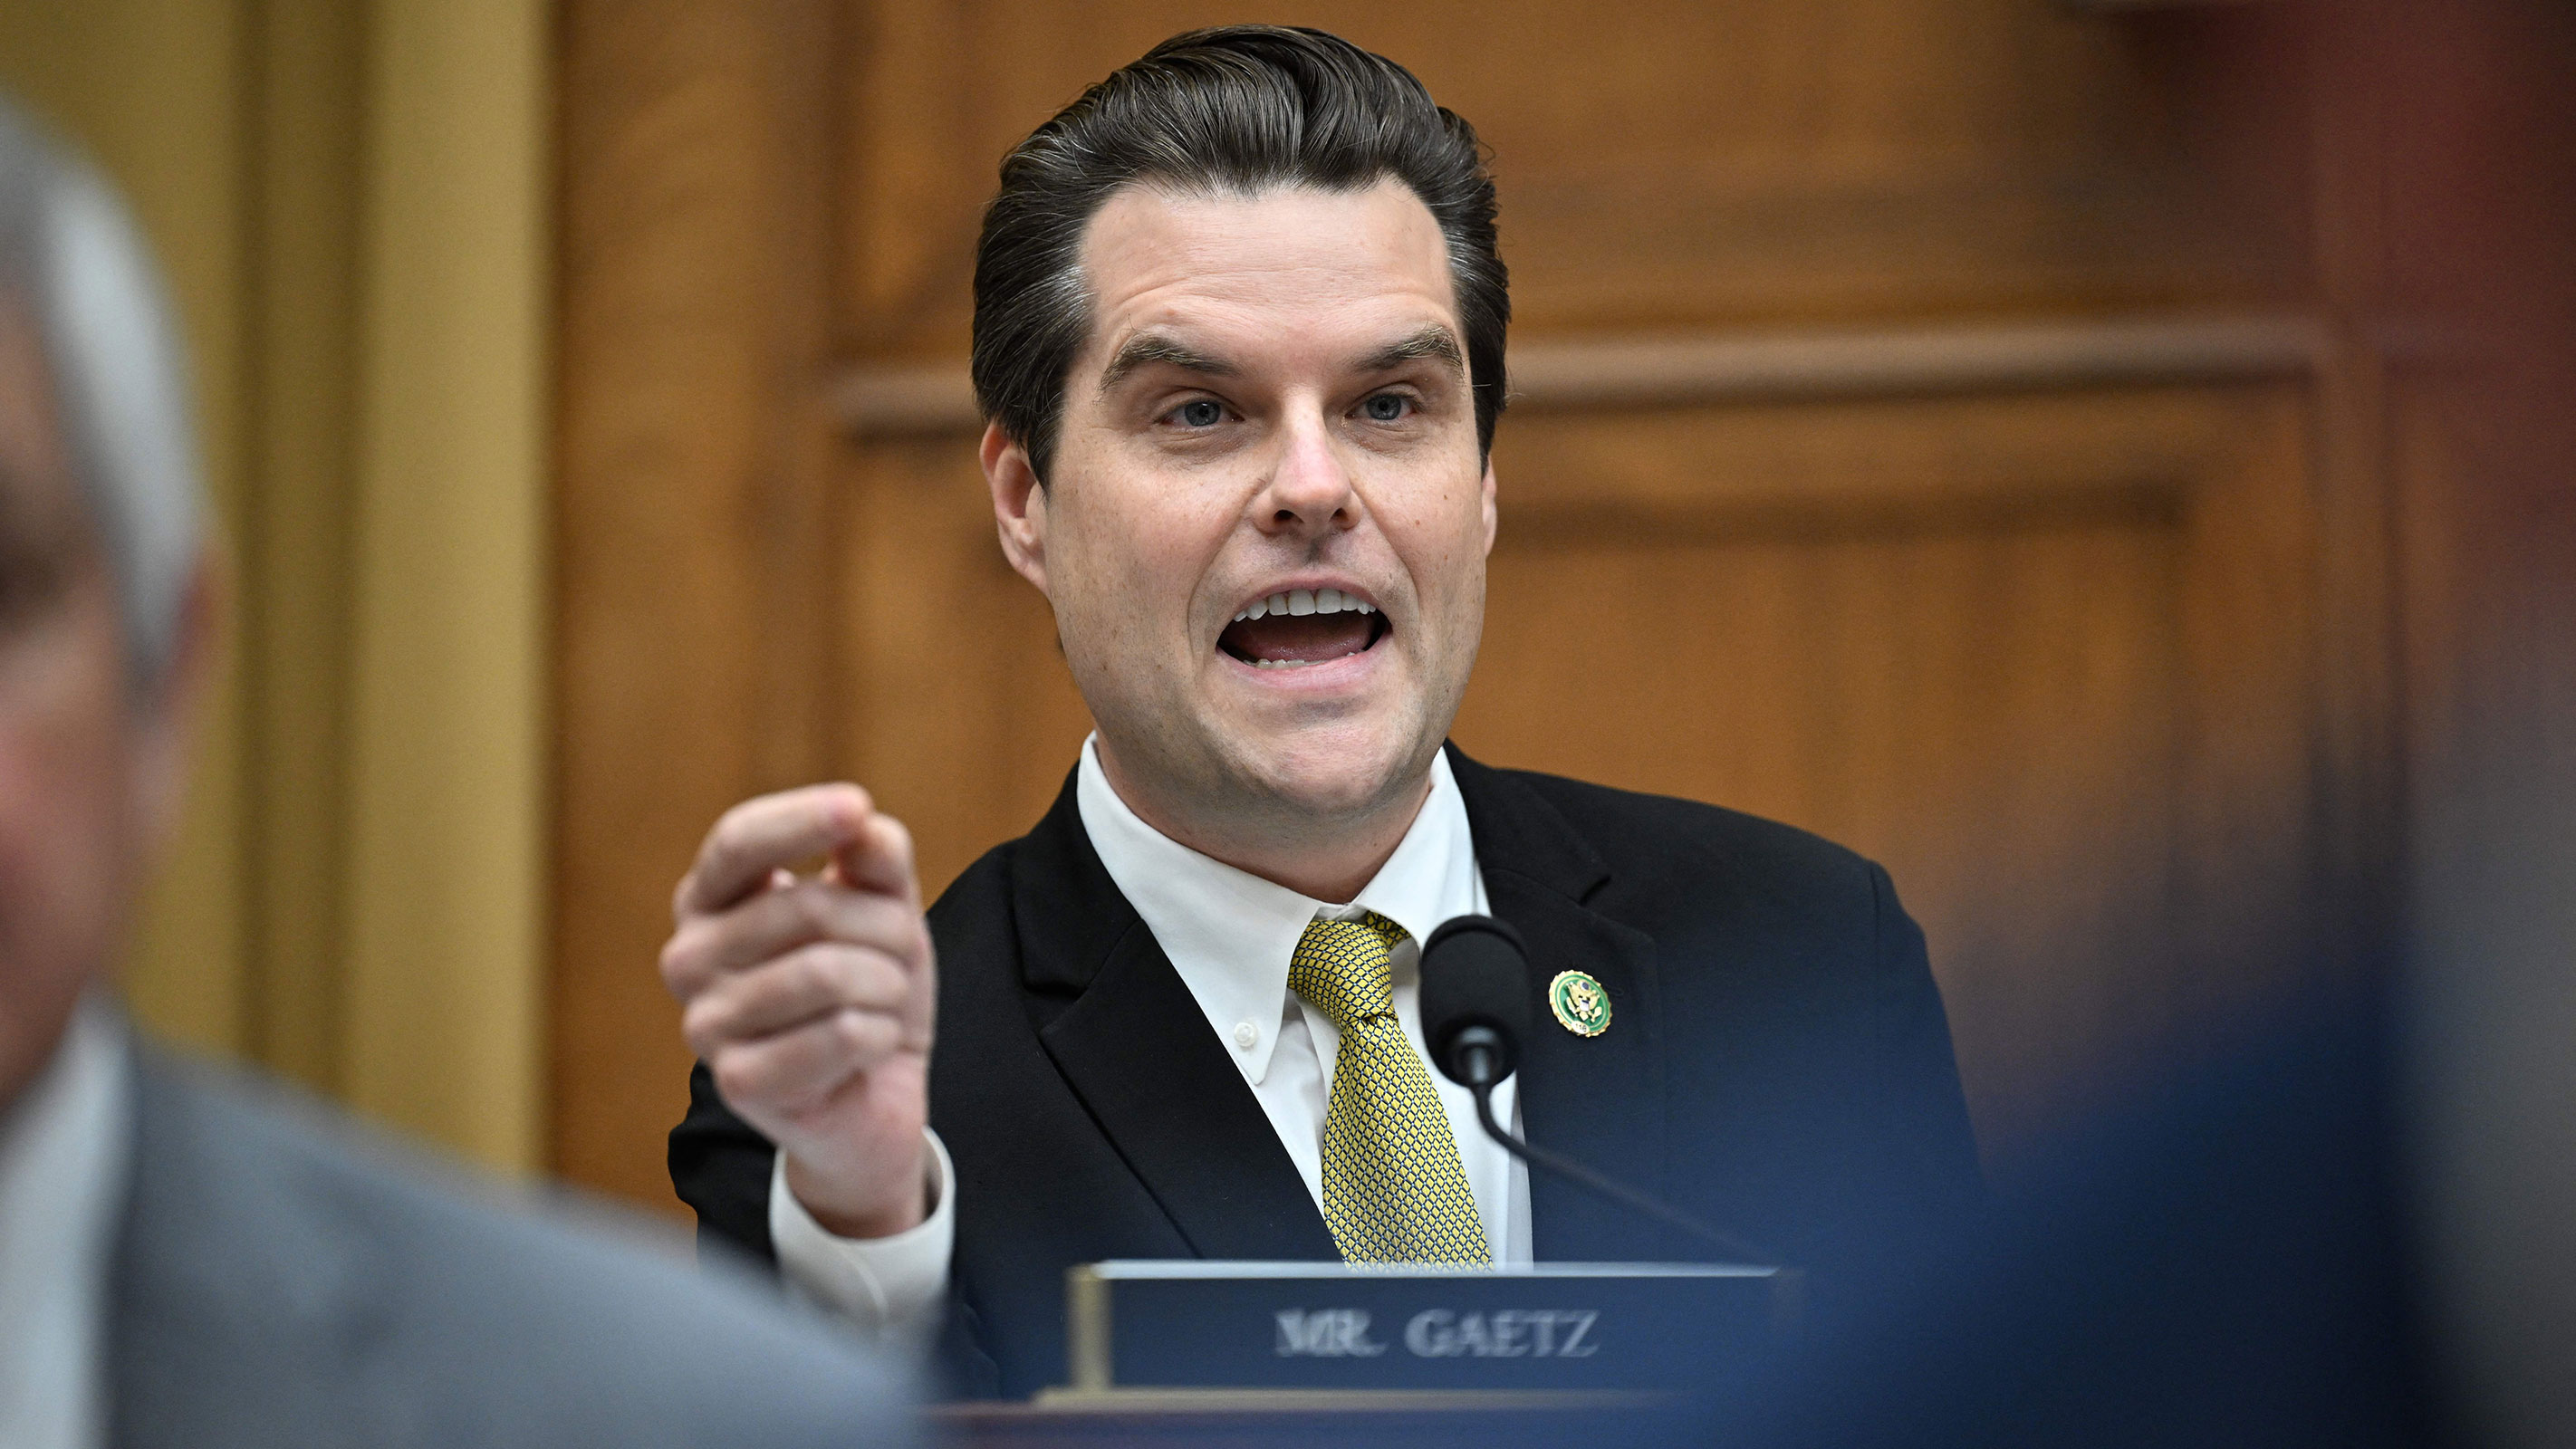 US Republican Representative Matt Gaetz of Florida questions Attorney General Merrick Garland during a hearing on Capitol Hill in Washington, DC, on Wednesday.